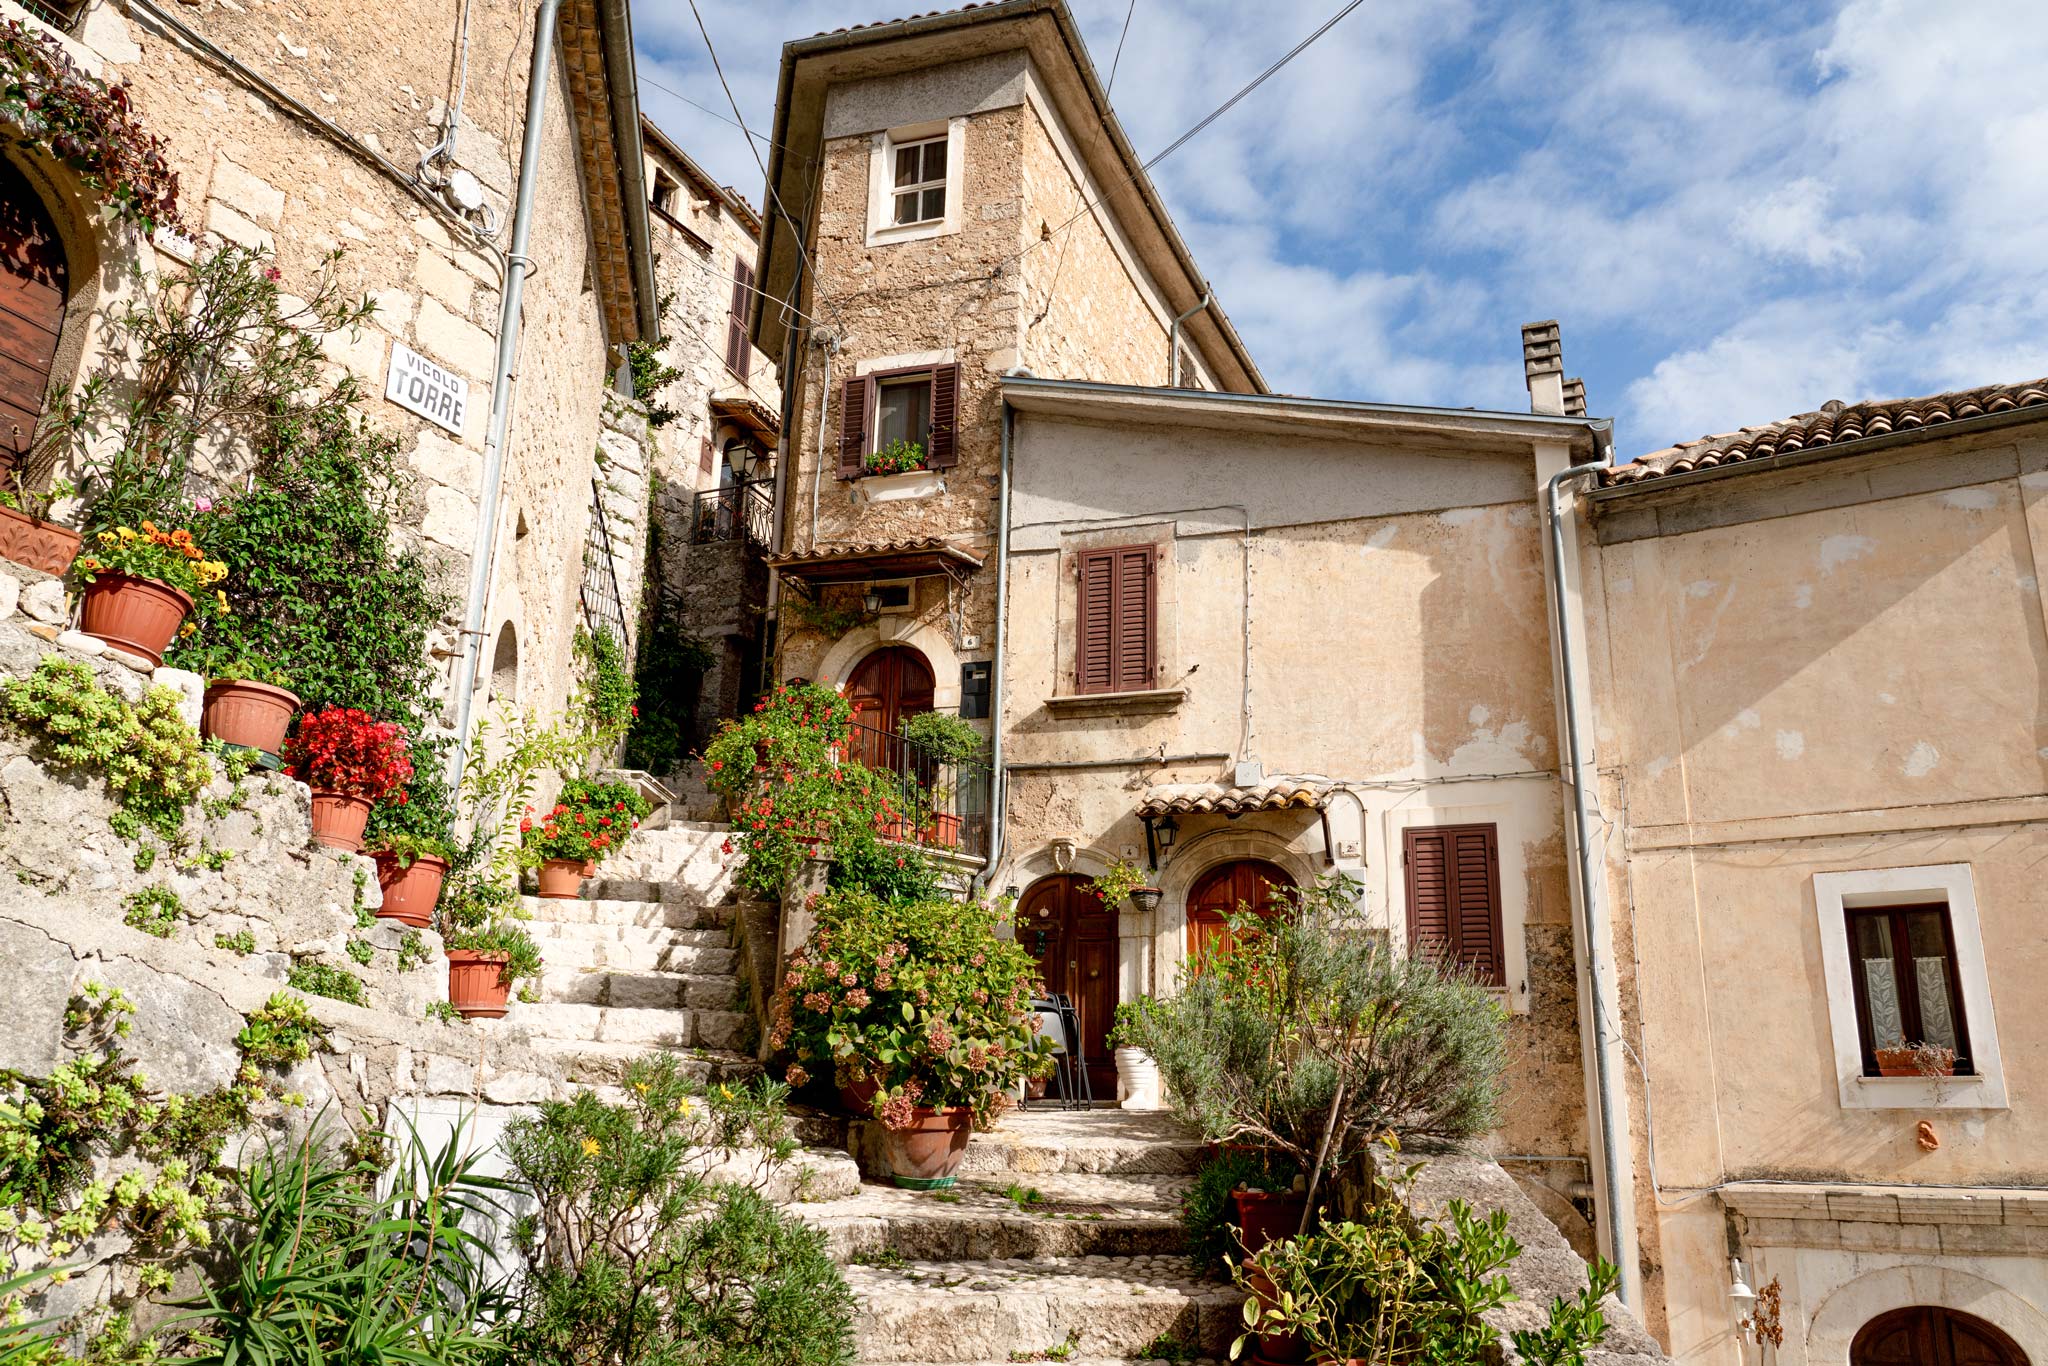 Colourful corners and flower pots on the streets of San Donato Val di Comino